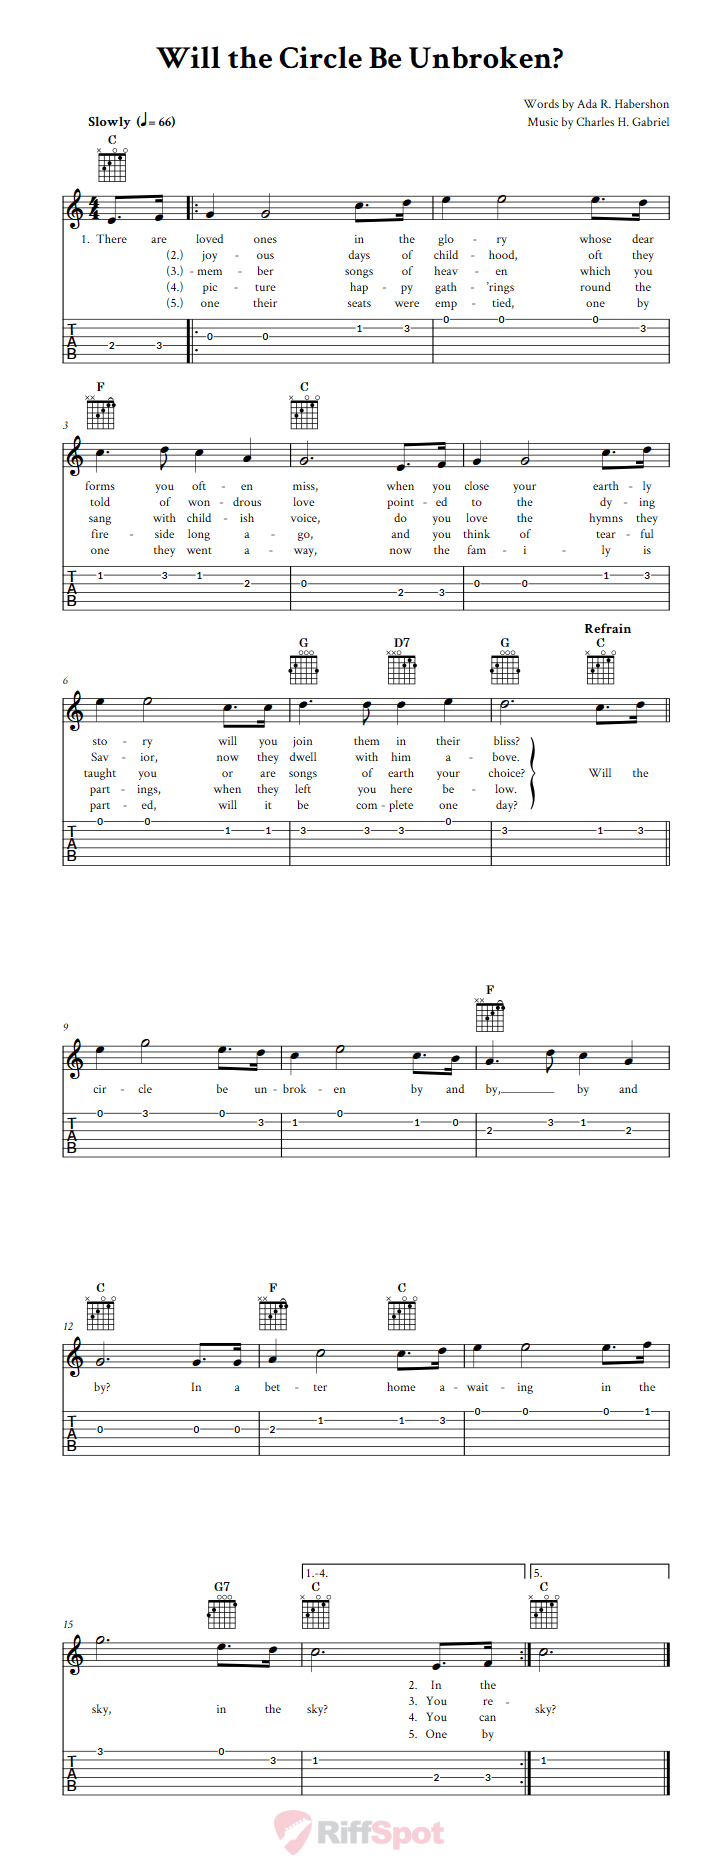 Will the Circle Be Unbroken? Guitar Tab